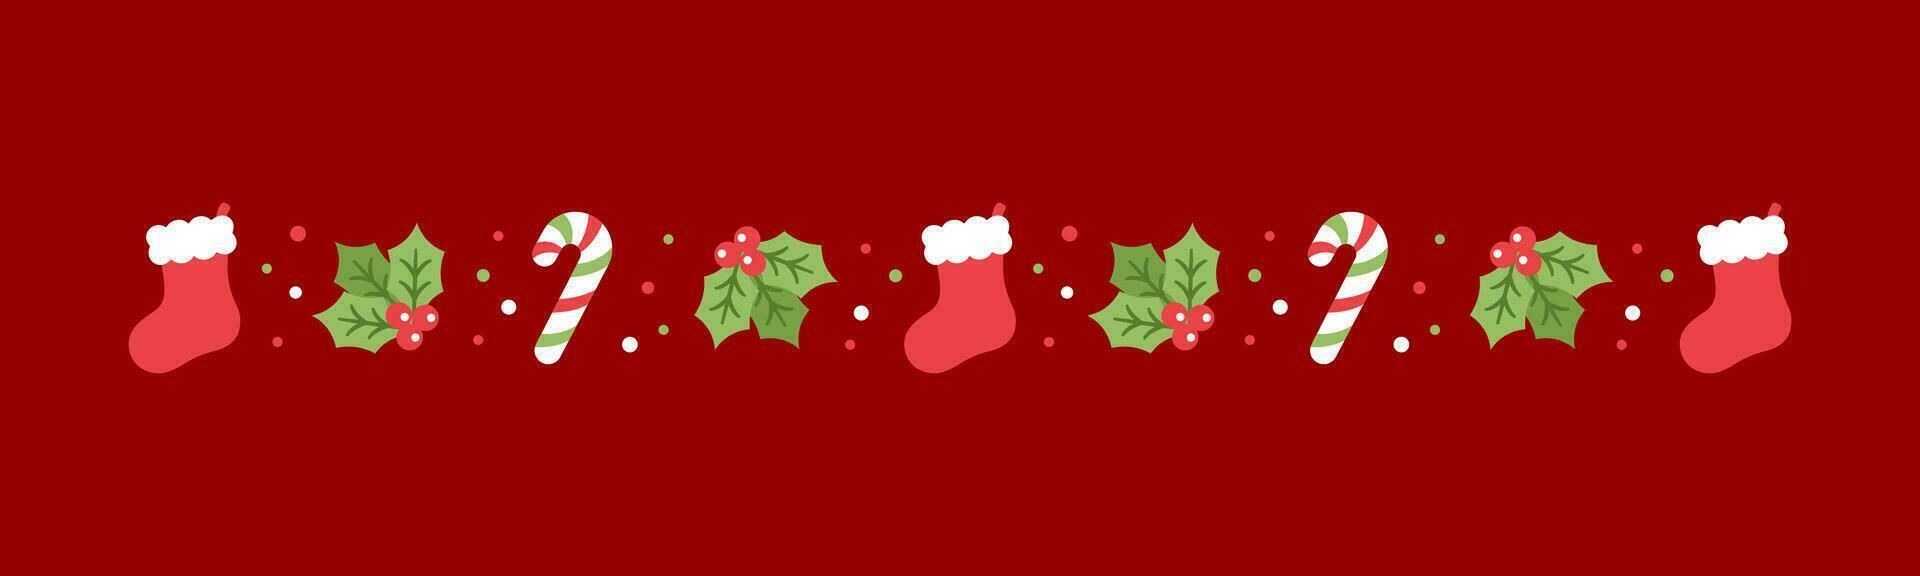 Christmas themed decorative border and text divider, Christmas Stocking, Candy Cane and Mistletoe Pattern. Vector Illustration.